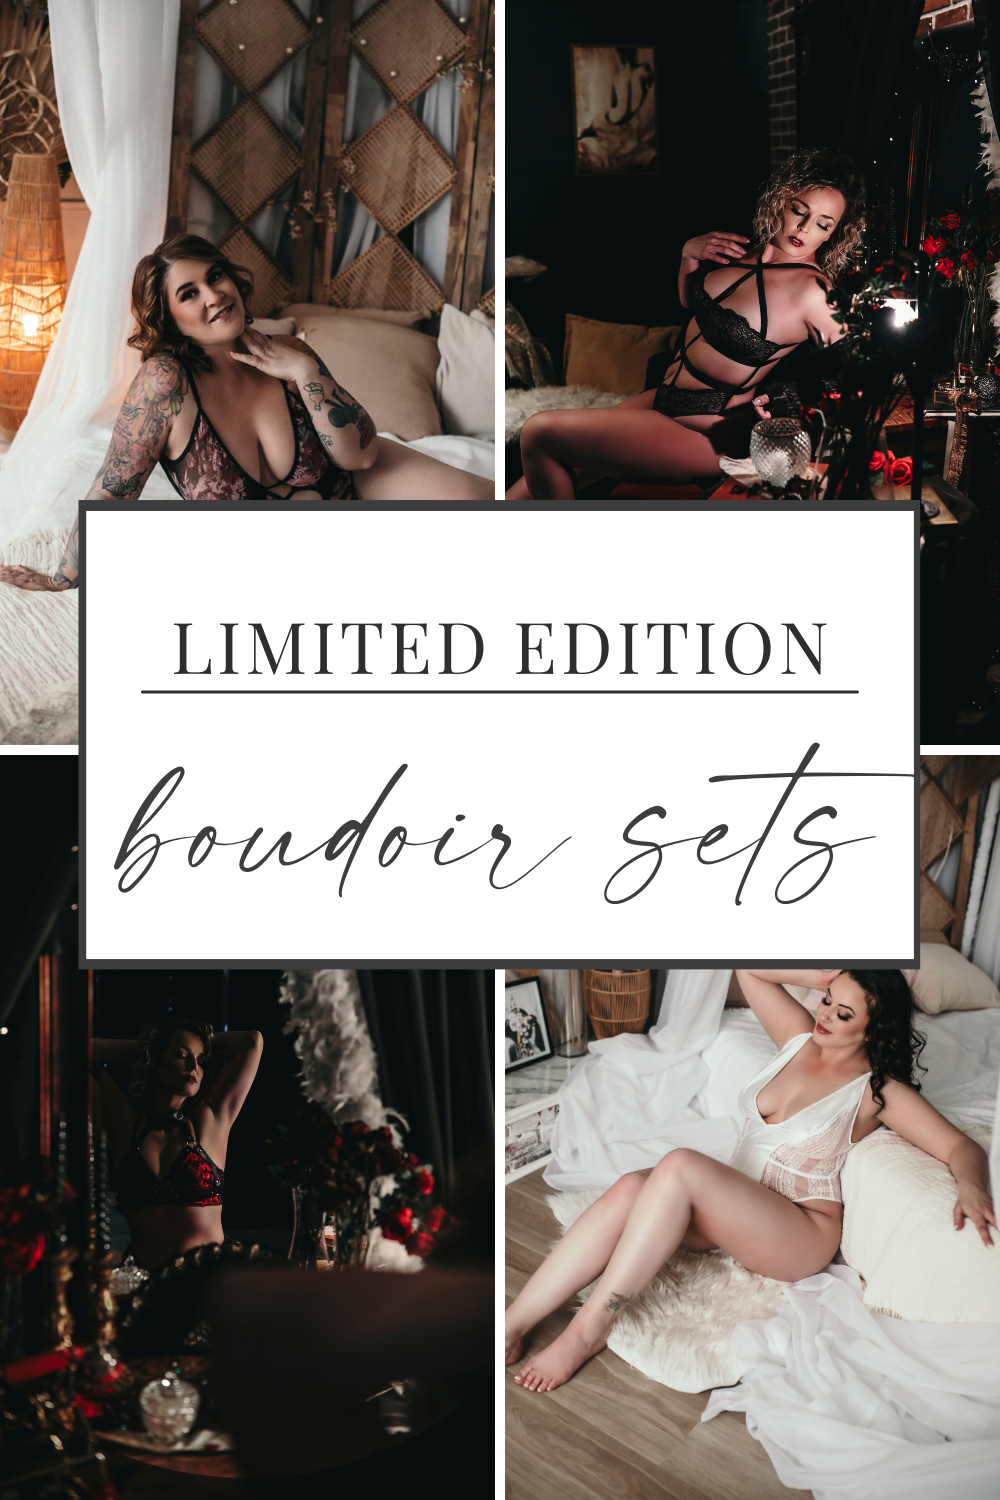 Check out Gabriela Cruz's limited edition boudoir photography sets - constantly changing throughout the year to WOW clients.